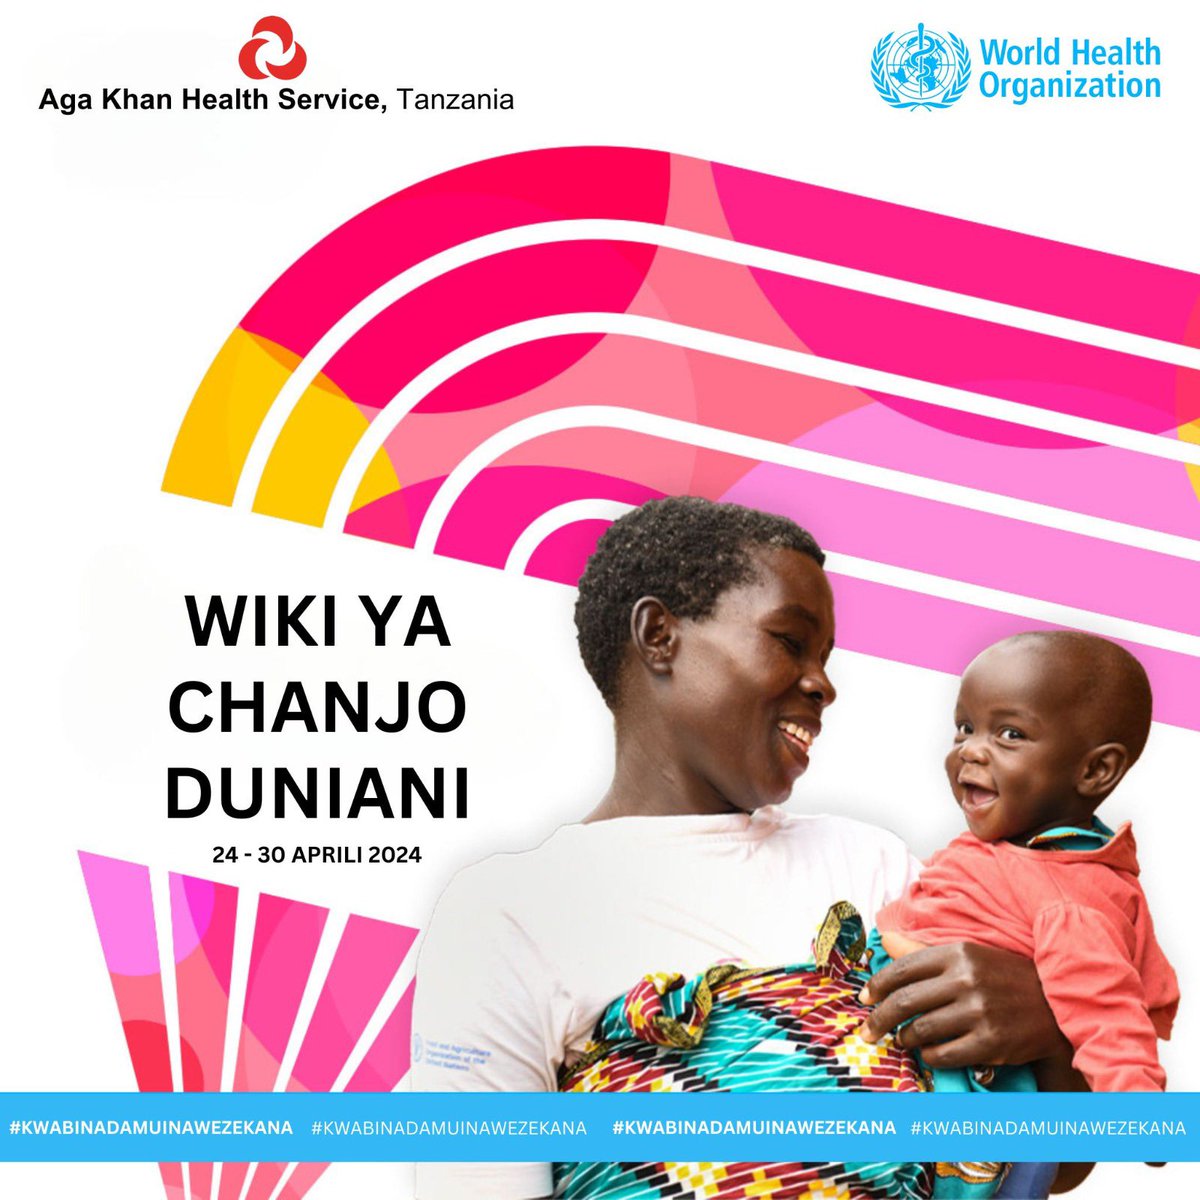 On April 24th-30th every year we mark World Immunization Week to raise awareness of the importance of vaccines and immunizations to people and their communities to protect themselves against preventable diseases. #agakhanhospitaldsm #humanlypossible #worldimmunizationweek2024